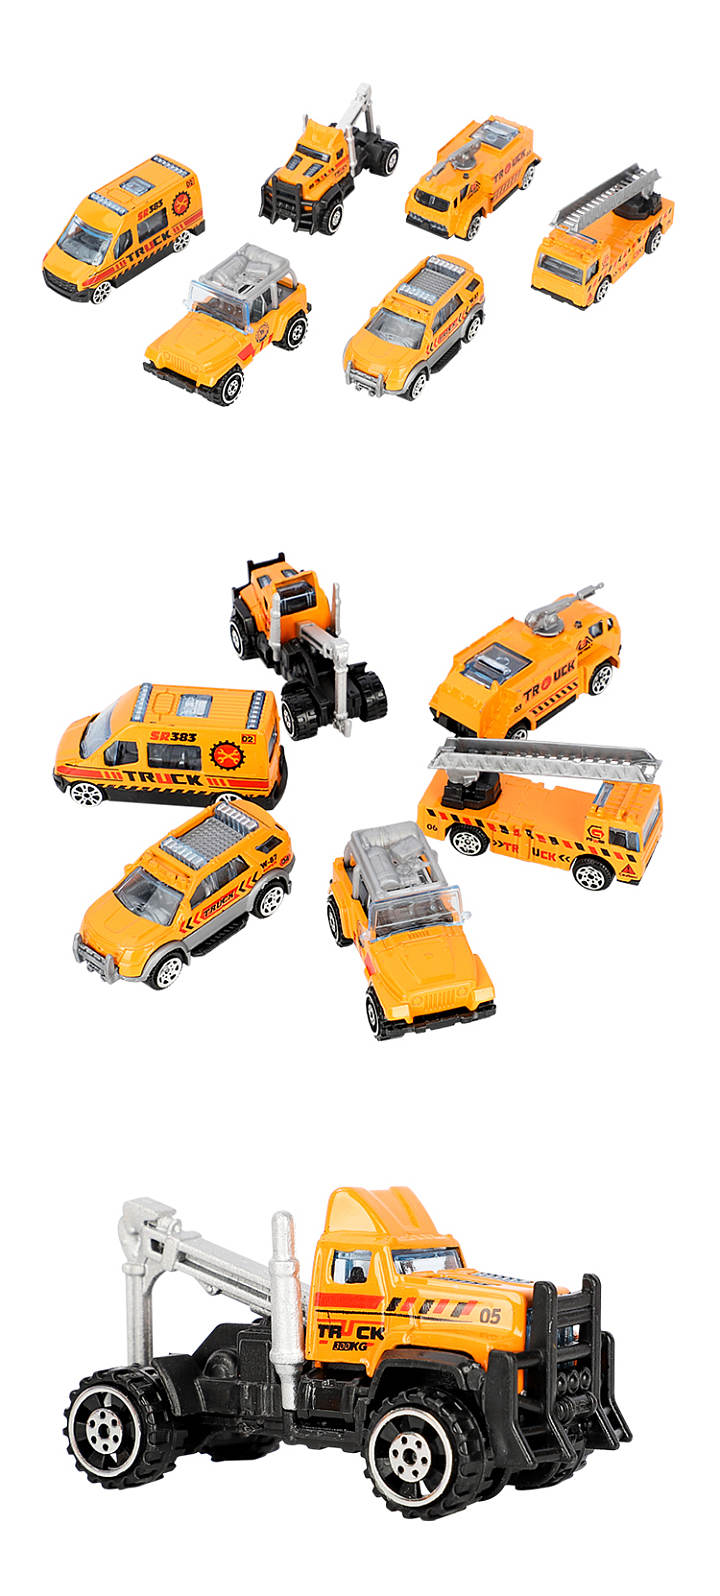 6Pcs Kids Engineering Construction Vehicle Toy Set For Ages 3+